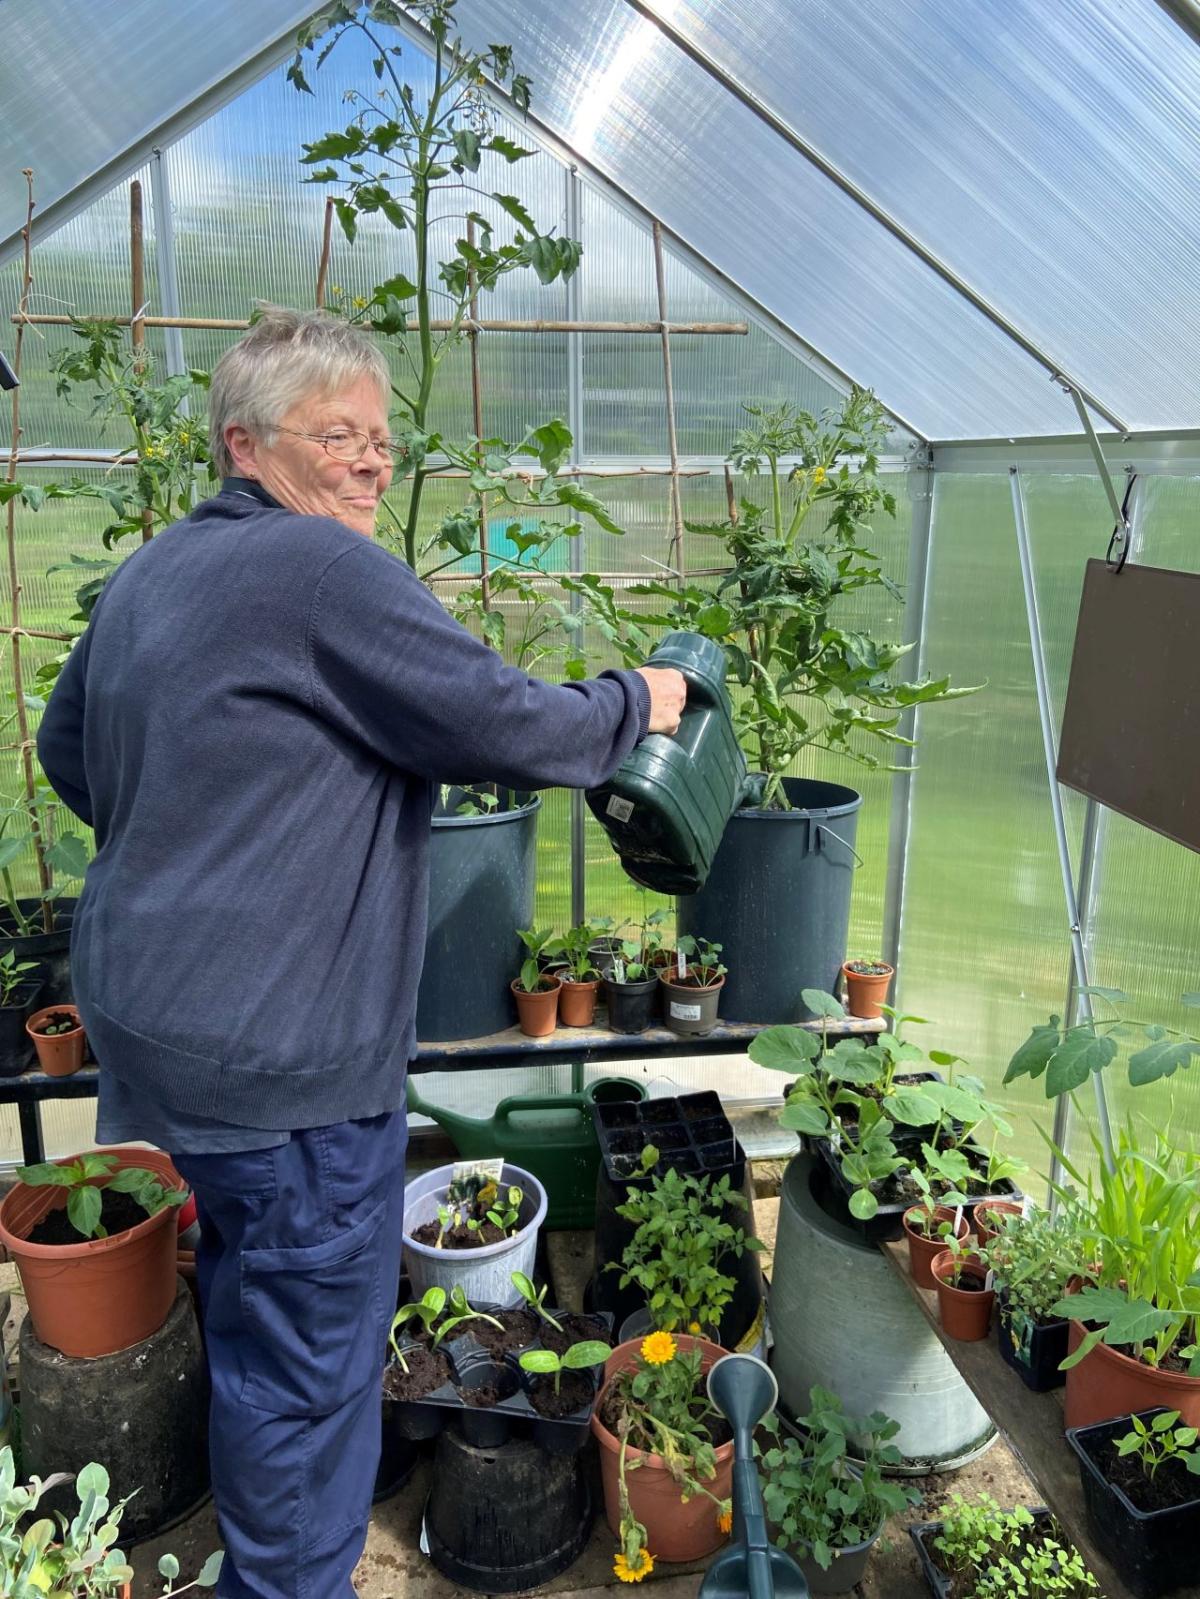 A person gardening in a greenhouse.